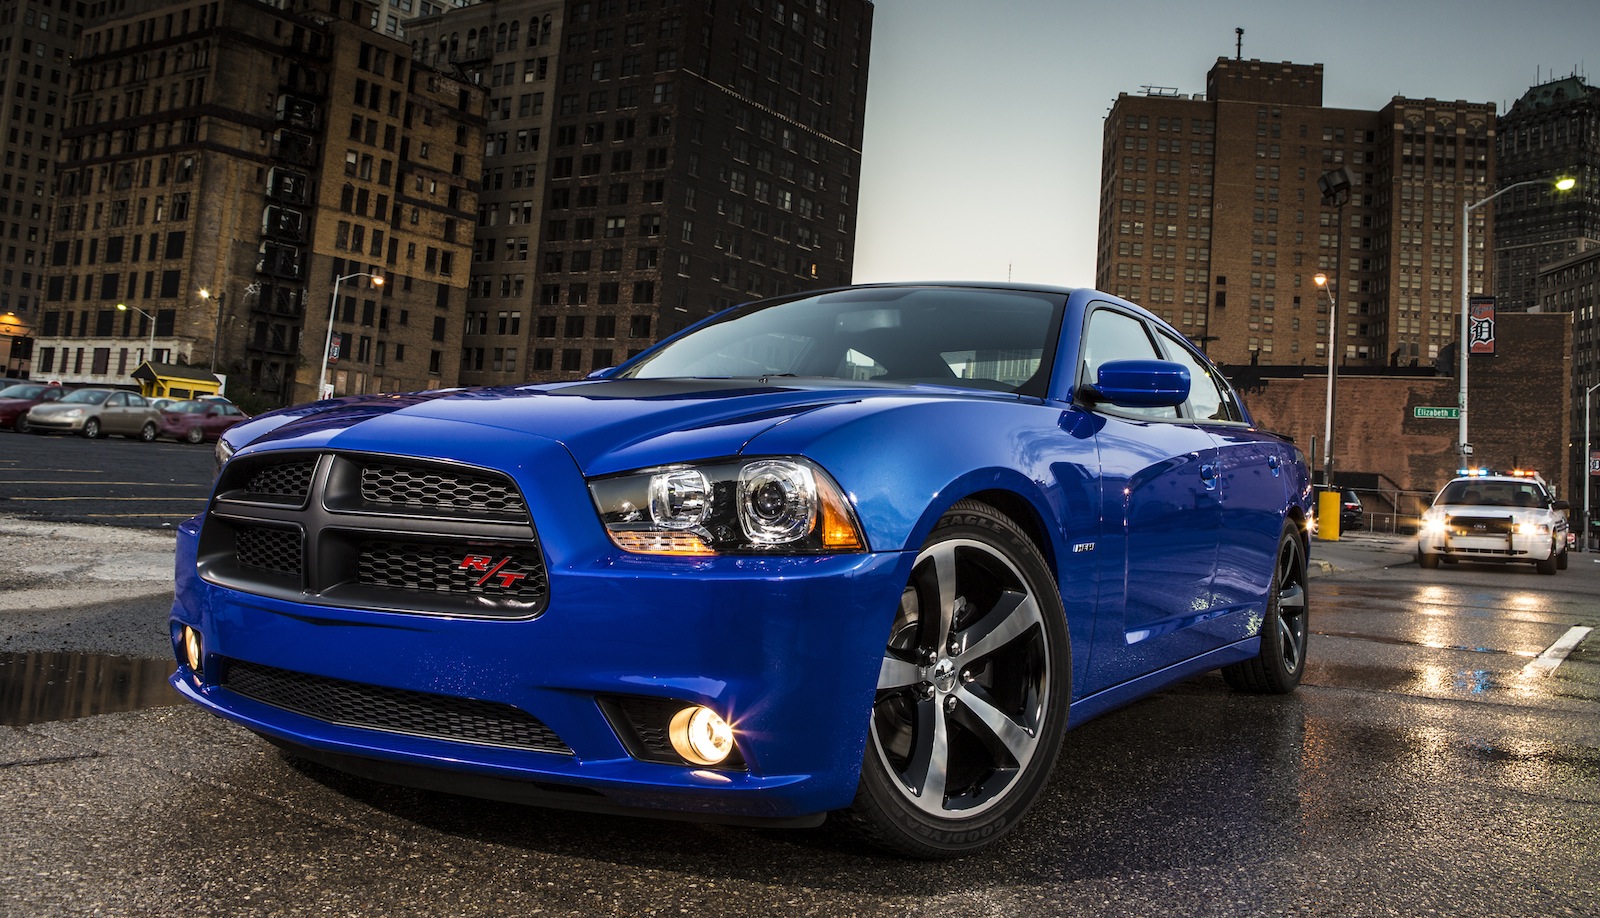 Automotive Fast Cars Dodge Charger In City Photo Picture Desktop Free